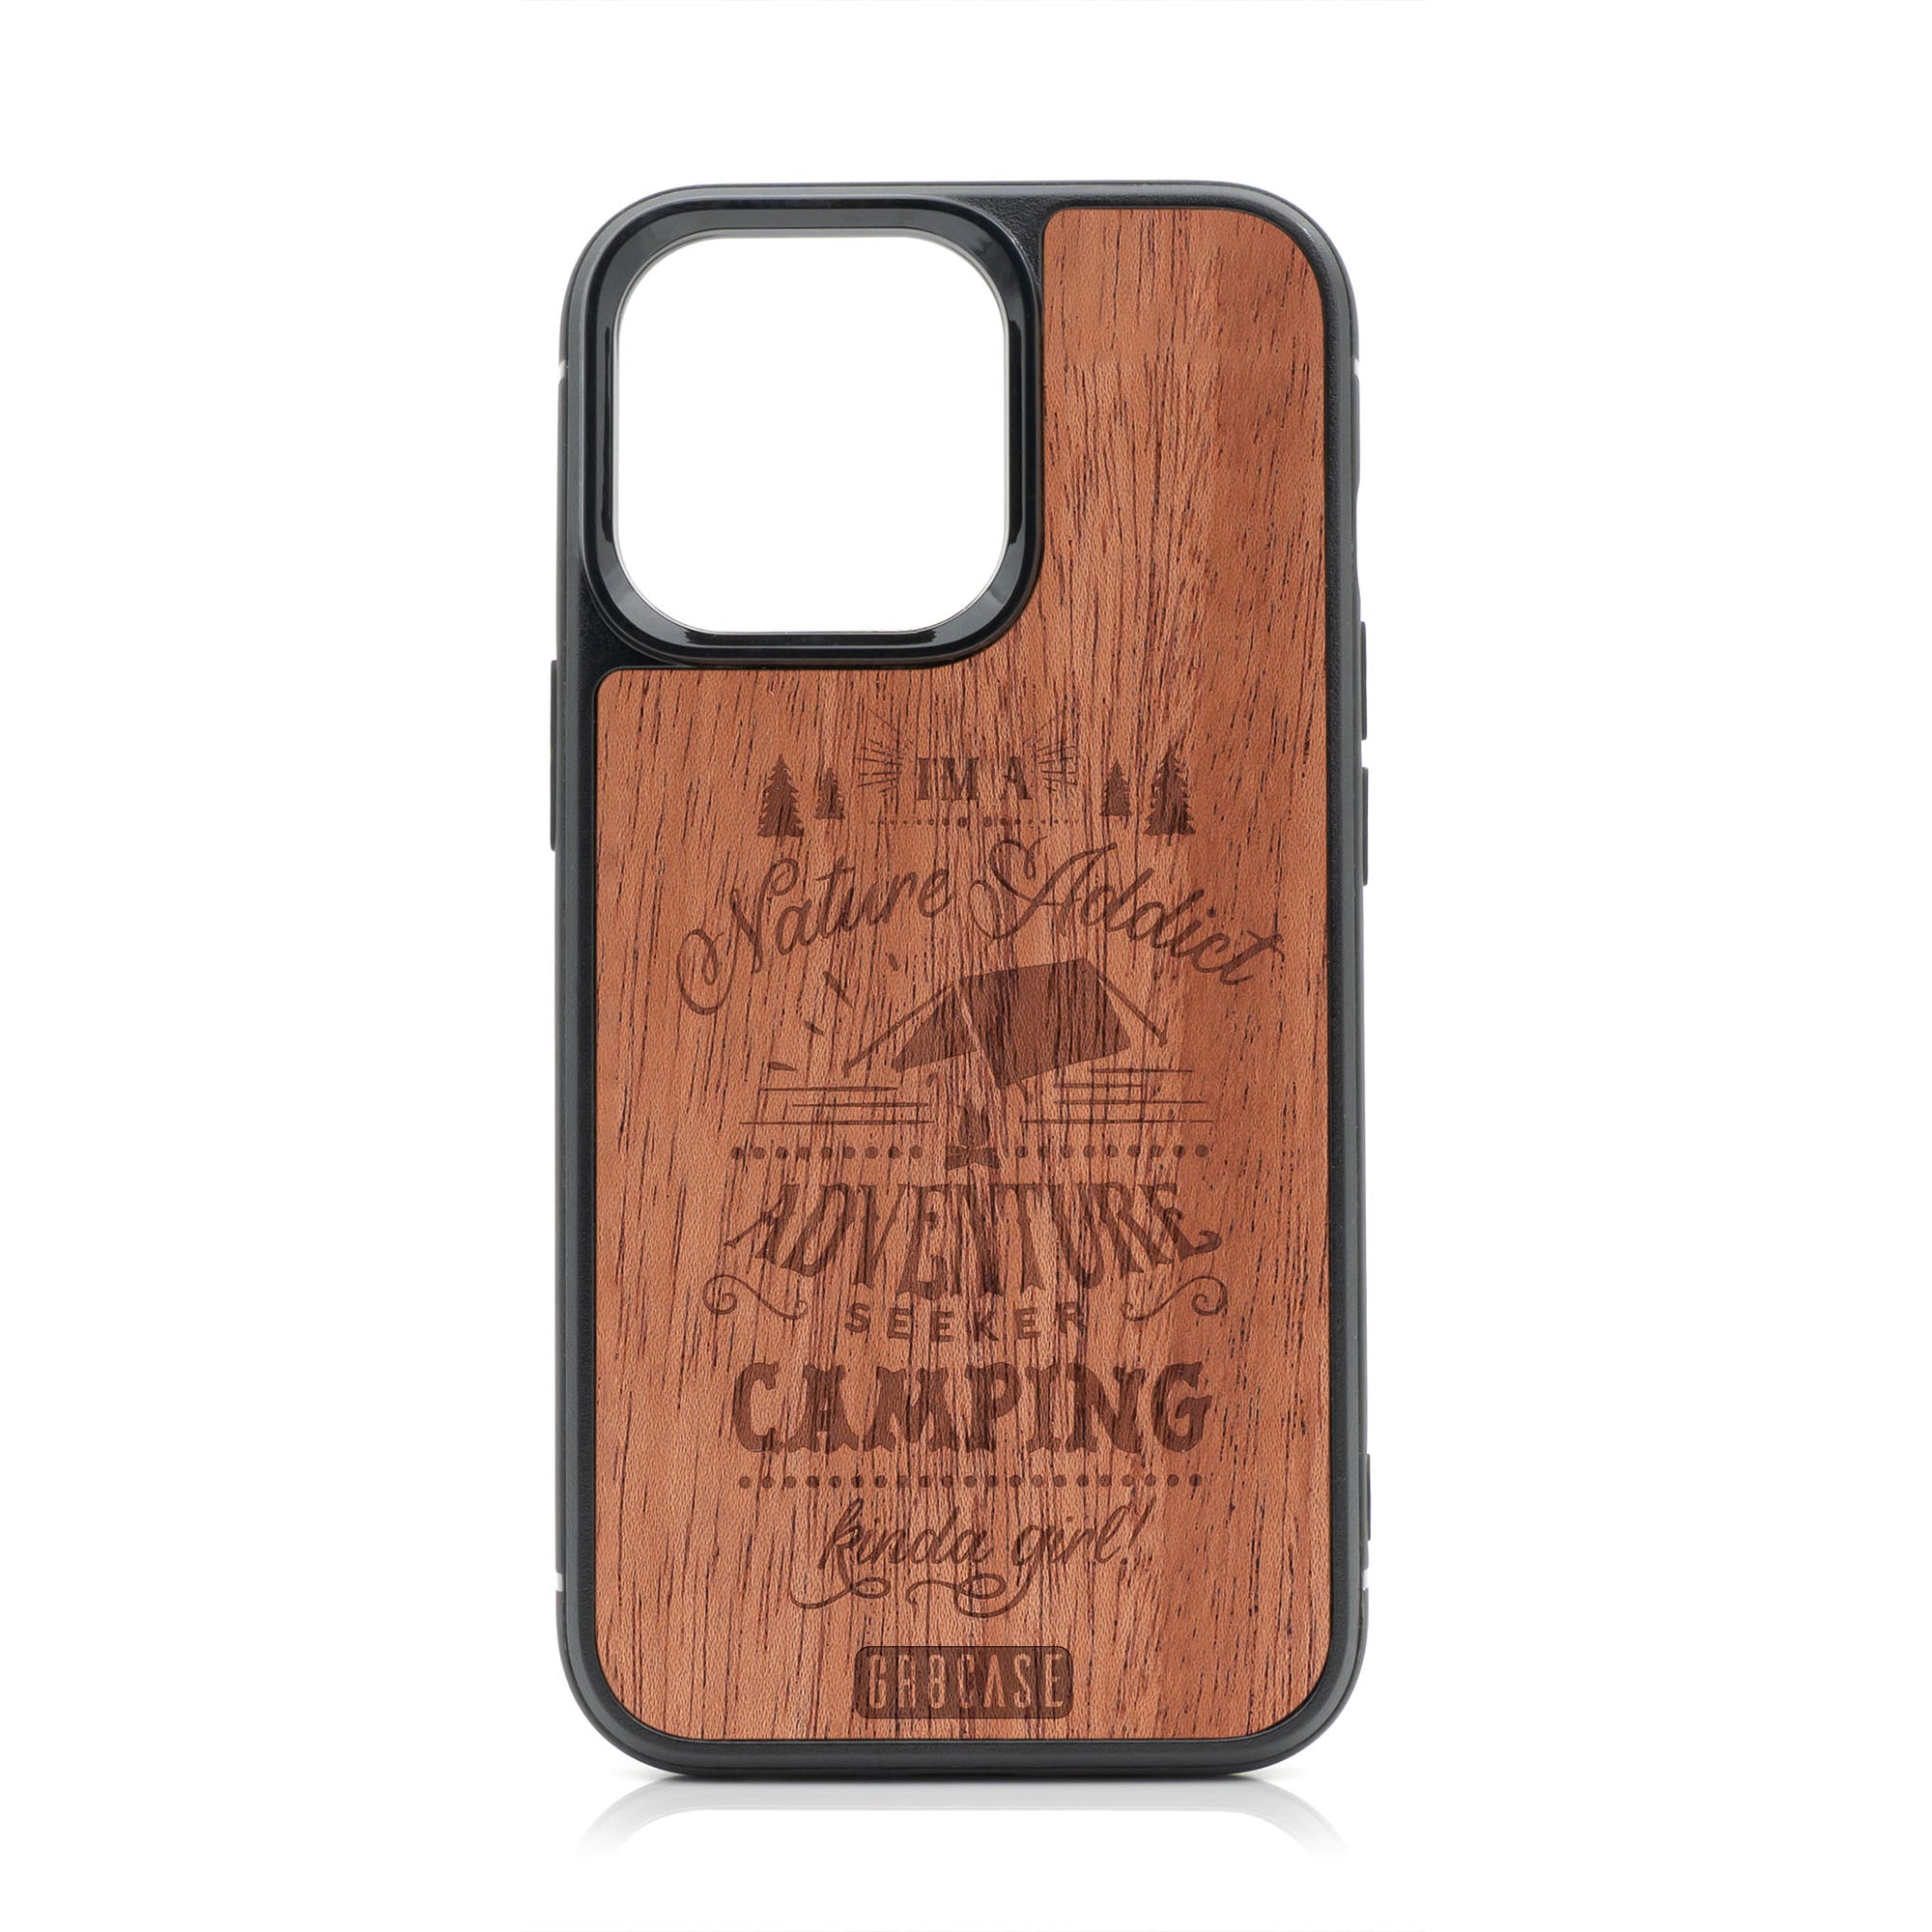 I'm A Nature Addict Adventure Seeker Camping Kinda Girl Design Wood Case For iPhone 13 Pro